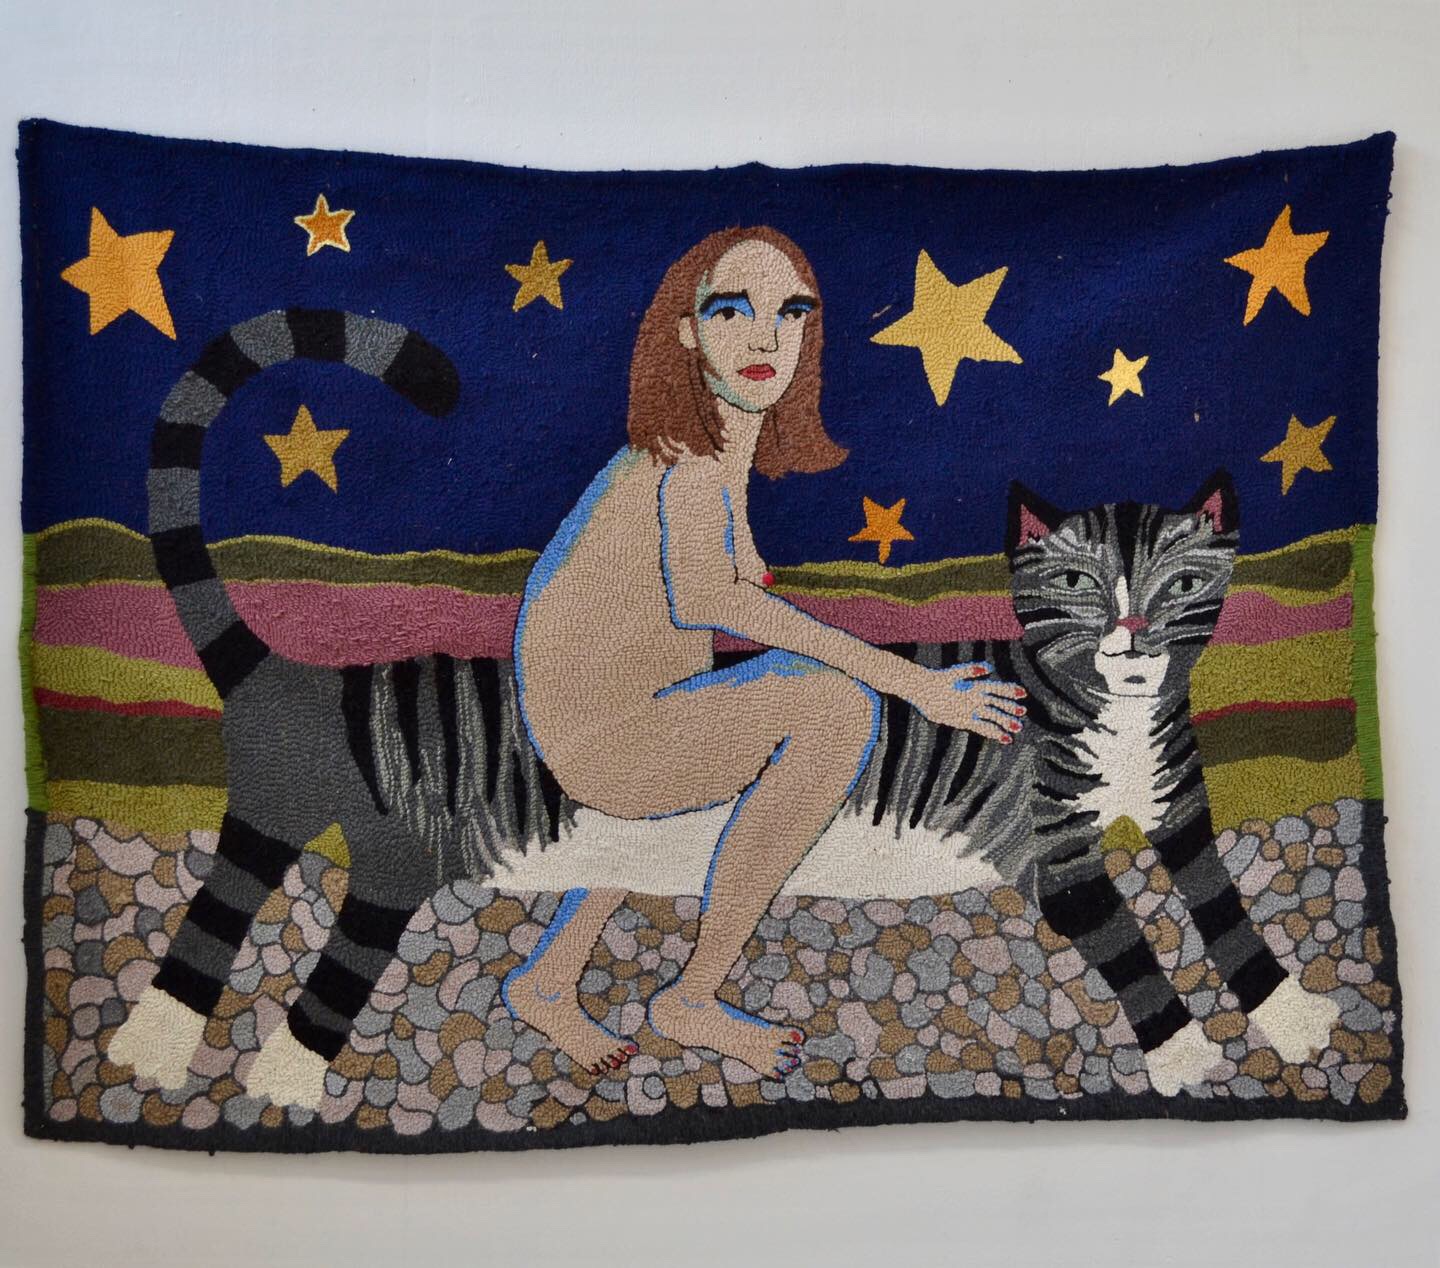 Textile art by Selby Hurst Inglefield of a naked woman riding a cat featuring a blue sky and gold star background